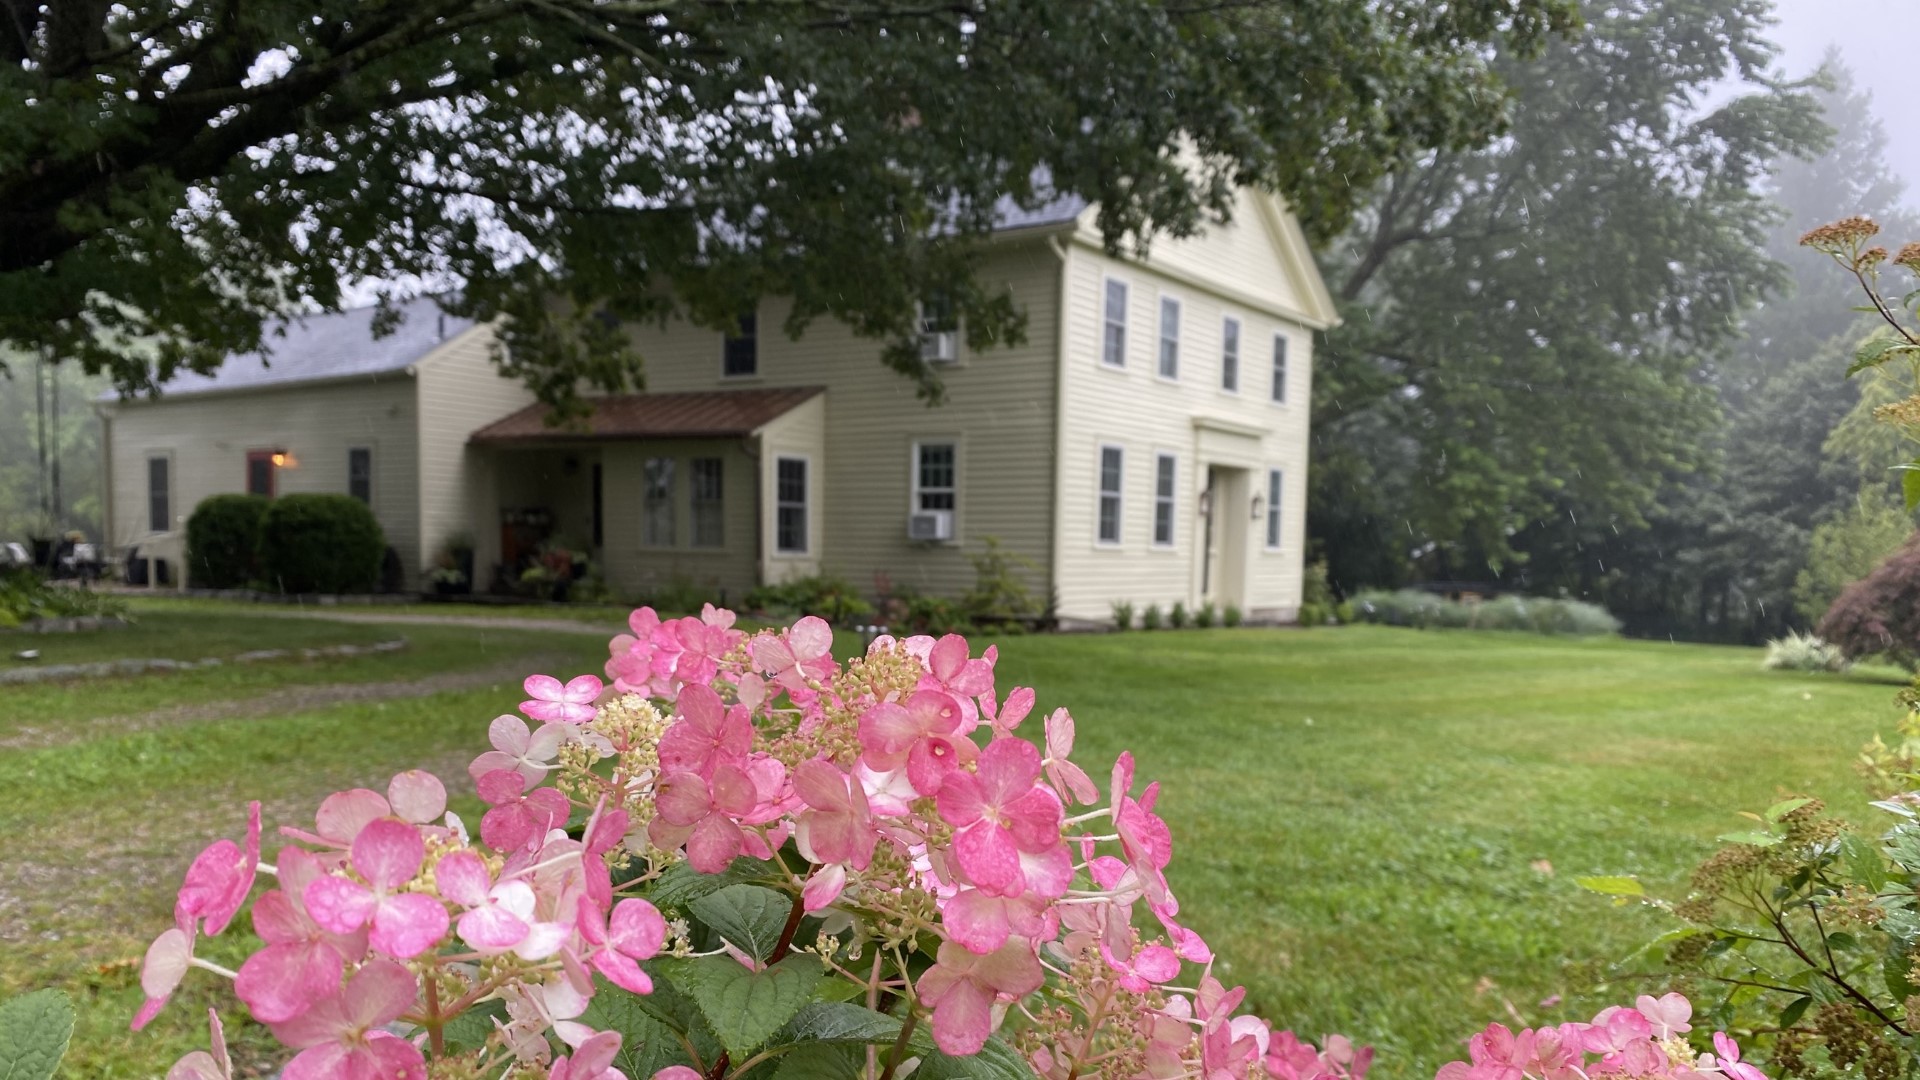 The Greek Revival Home in Bethlehem has stood since 1841 but the new acclaim that surrounds it has brought a buzz to the town.